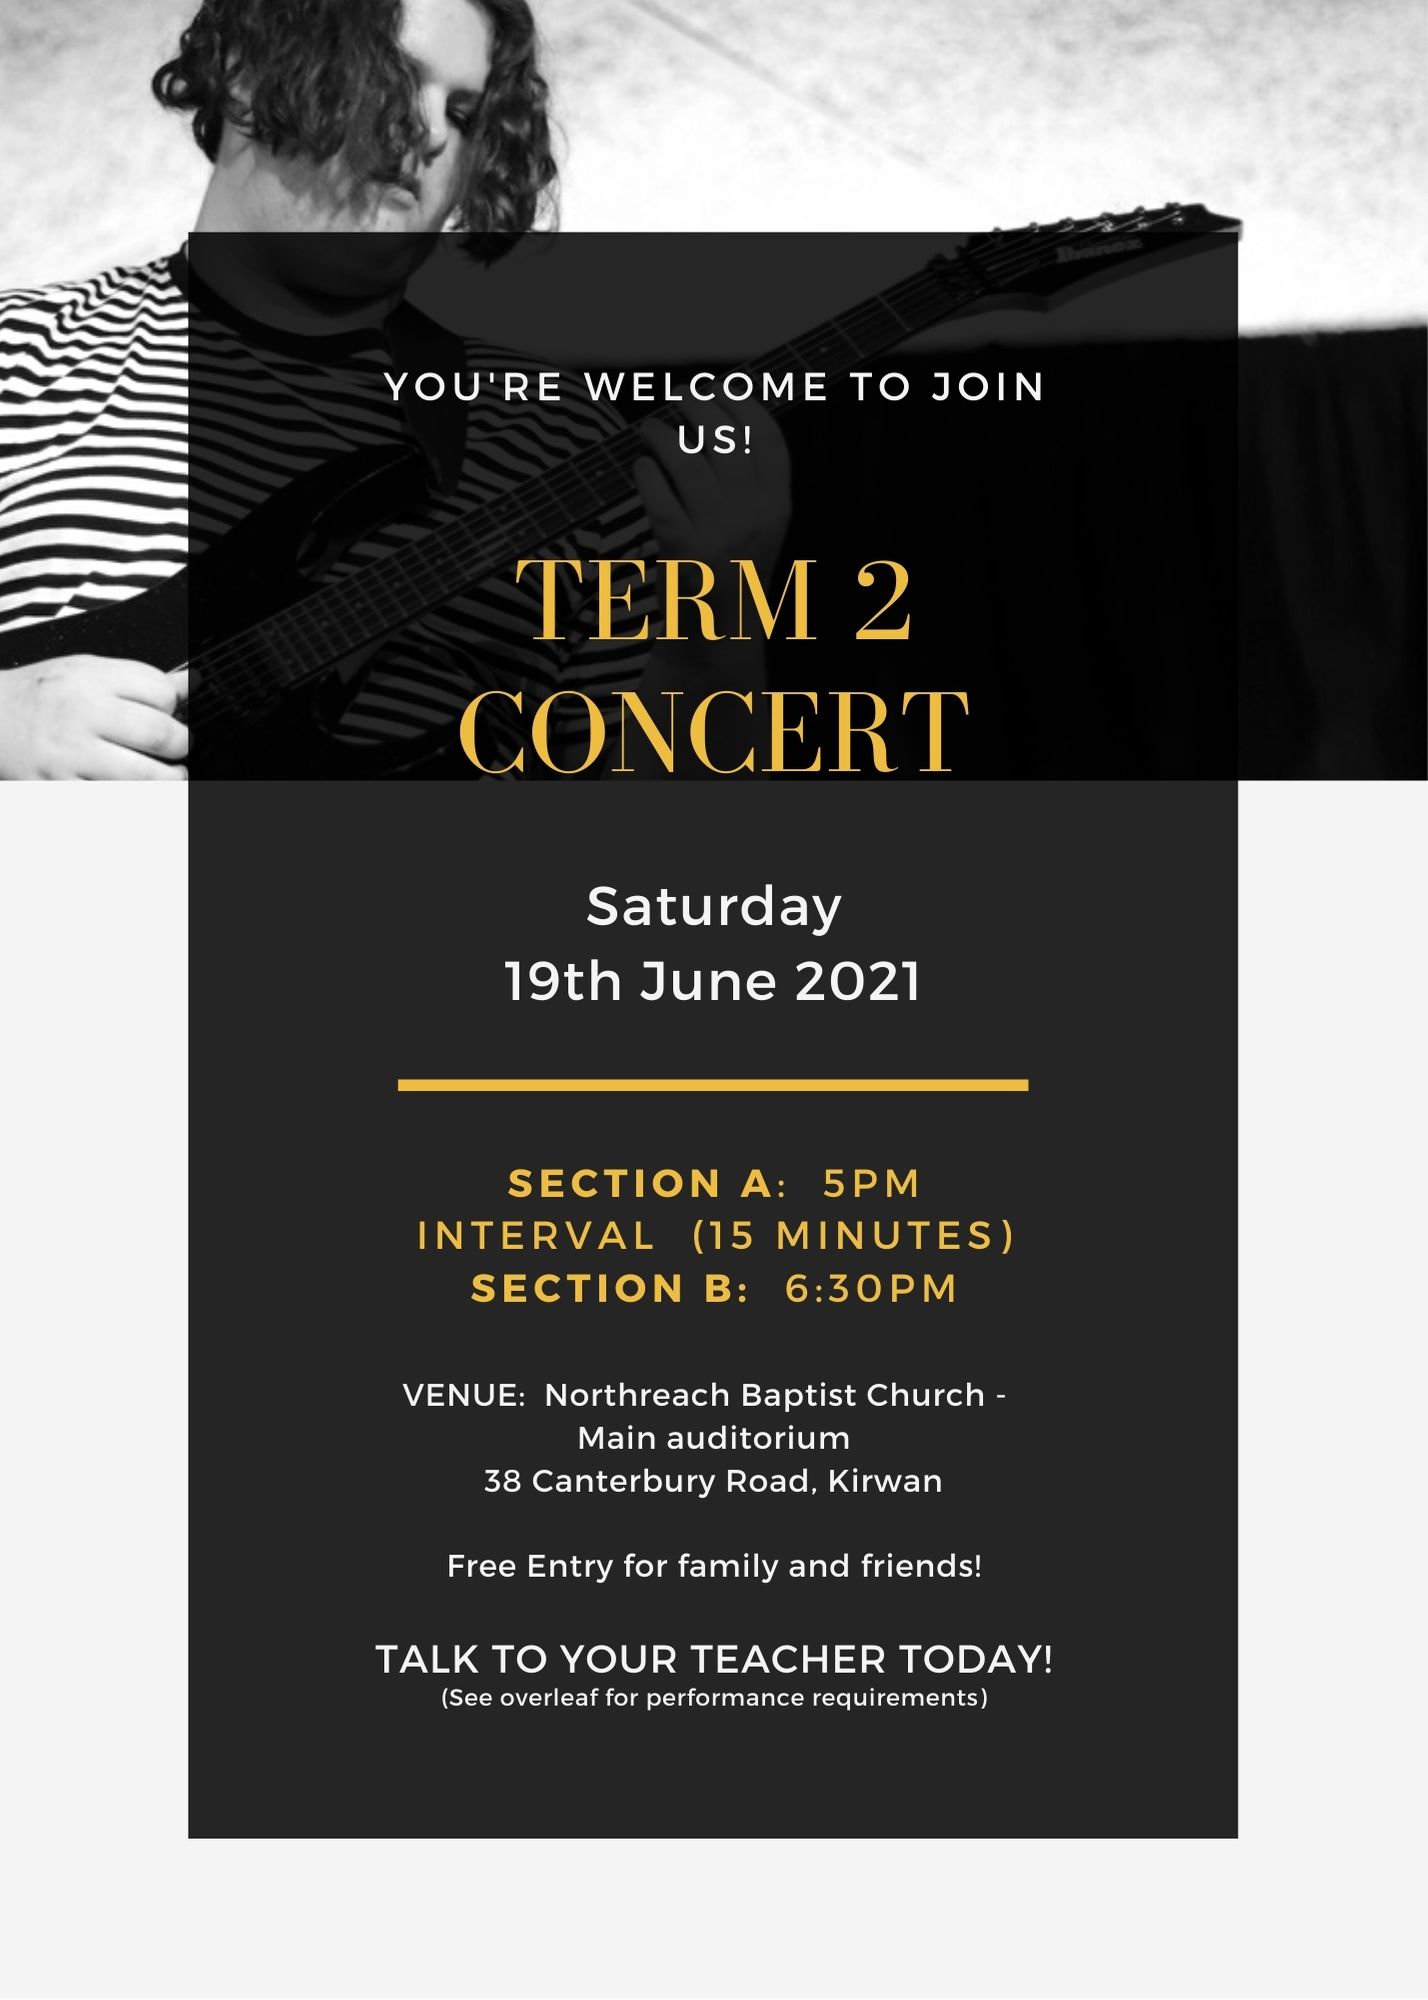 2020 Term 4 Concert sign up: NOW OPEN!